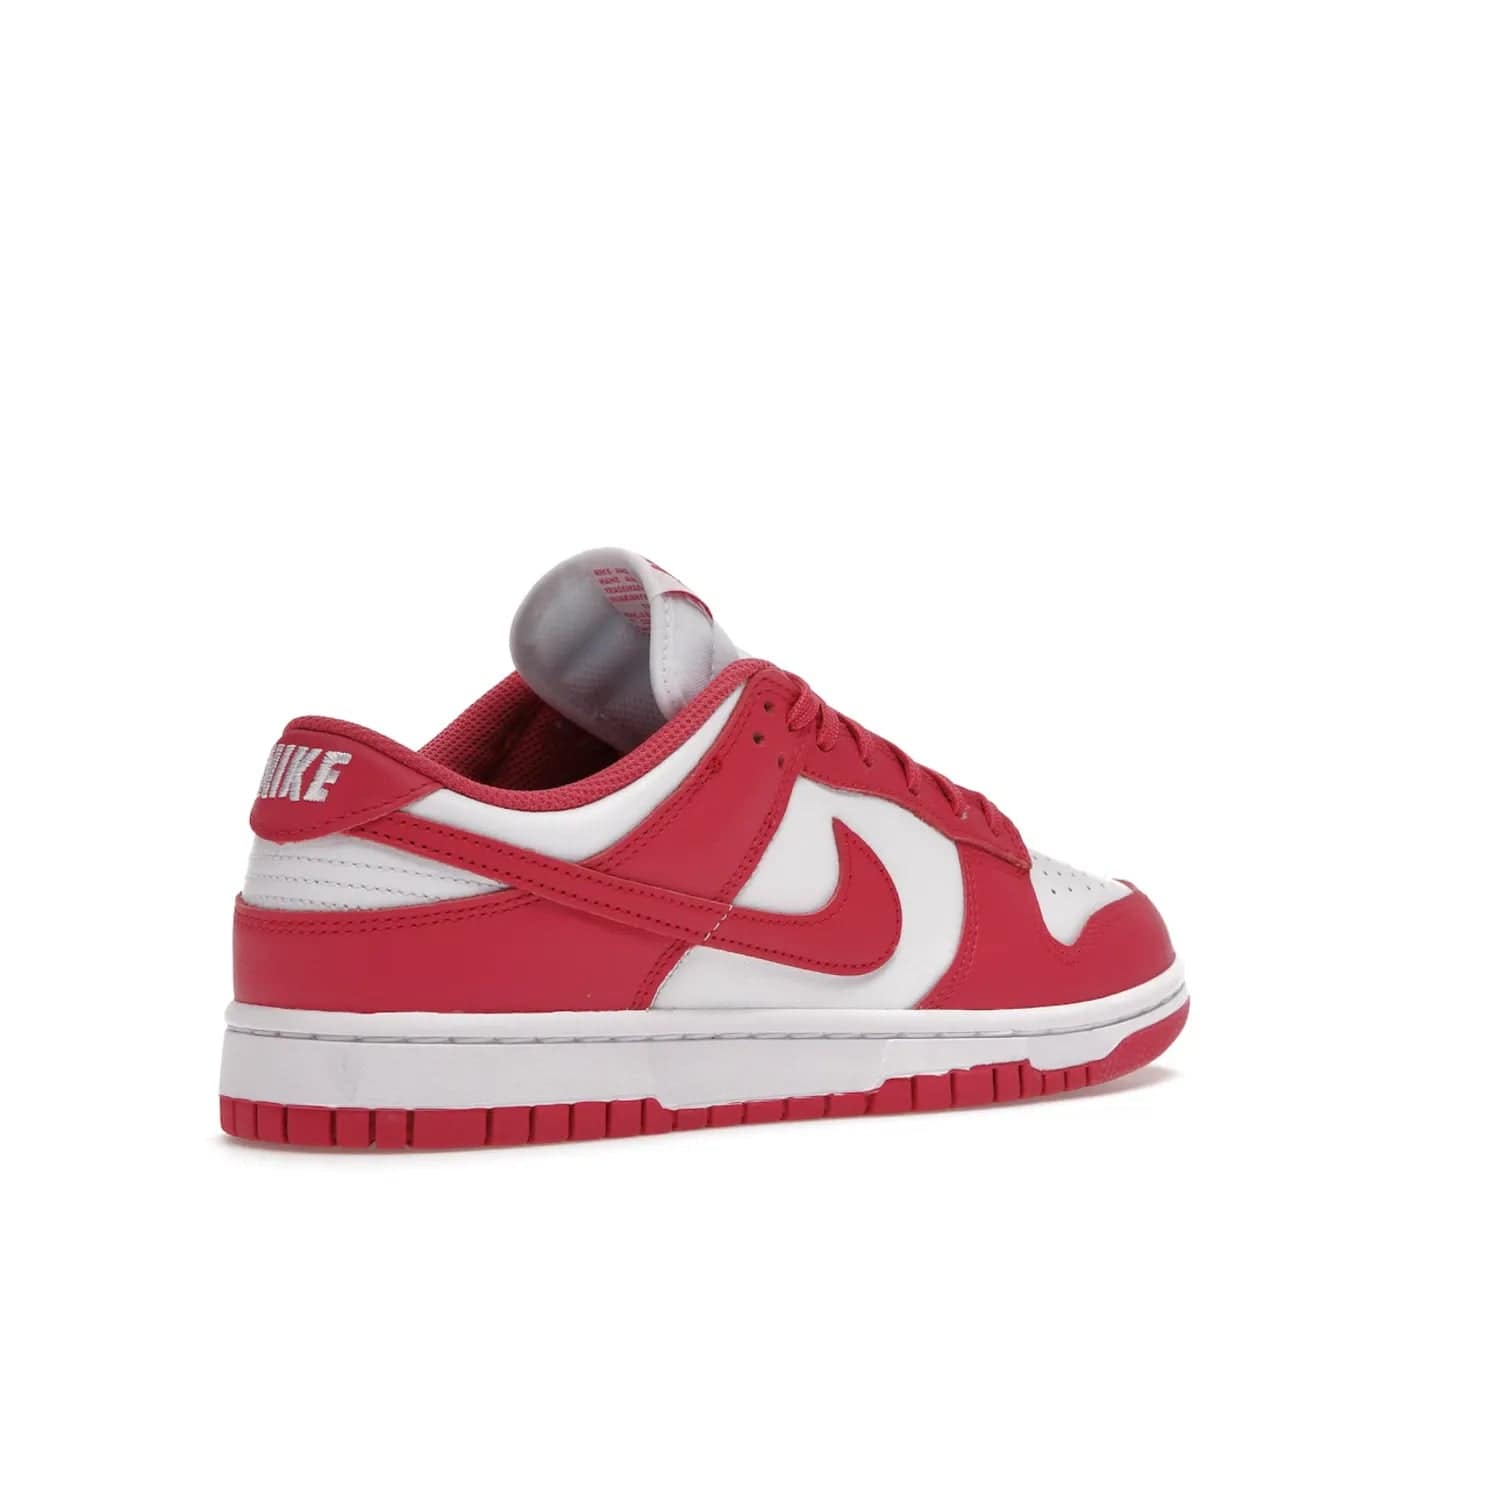 Nike Dunk Low Archeo Pink (Women's) - Image 33 - Only at www.BallersClubKickz.com - Introducing the stylish and comfortable Nike Dunk Low Archeo Pink (Women's). White/Archeo Pink colorway with white leather upper, pink overlays and Swooshes. Get yours now!